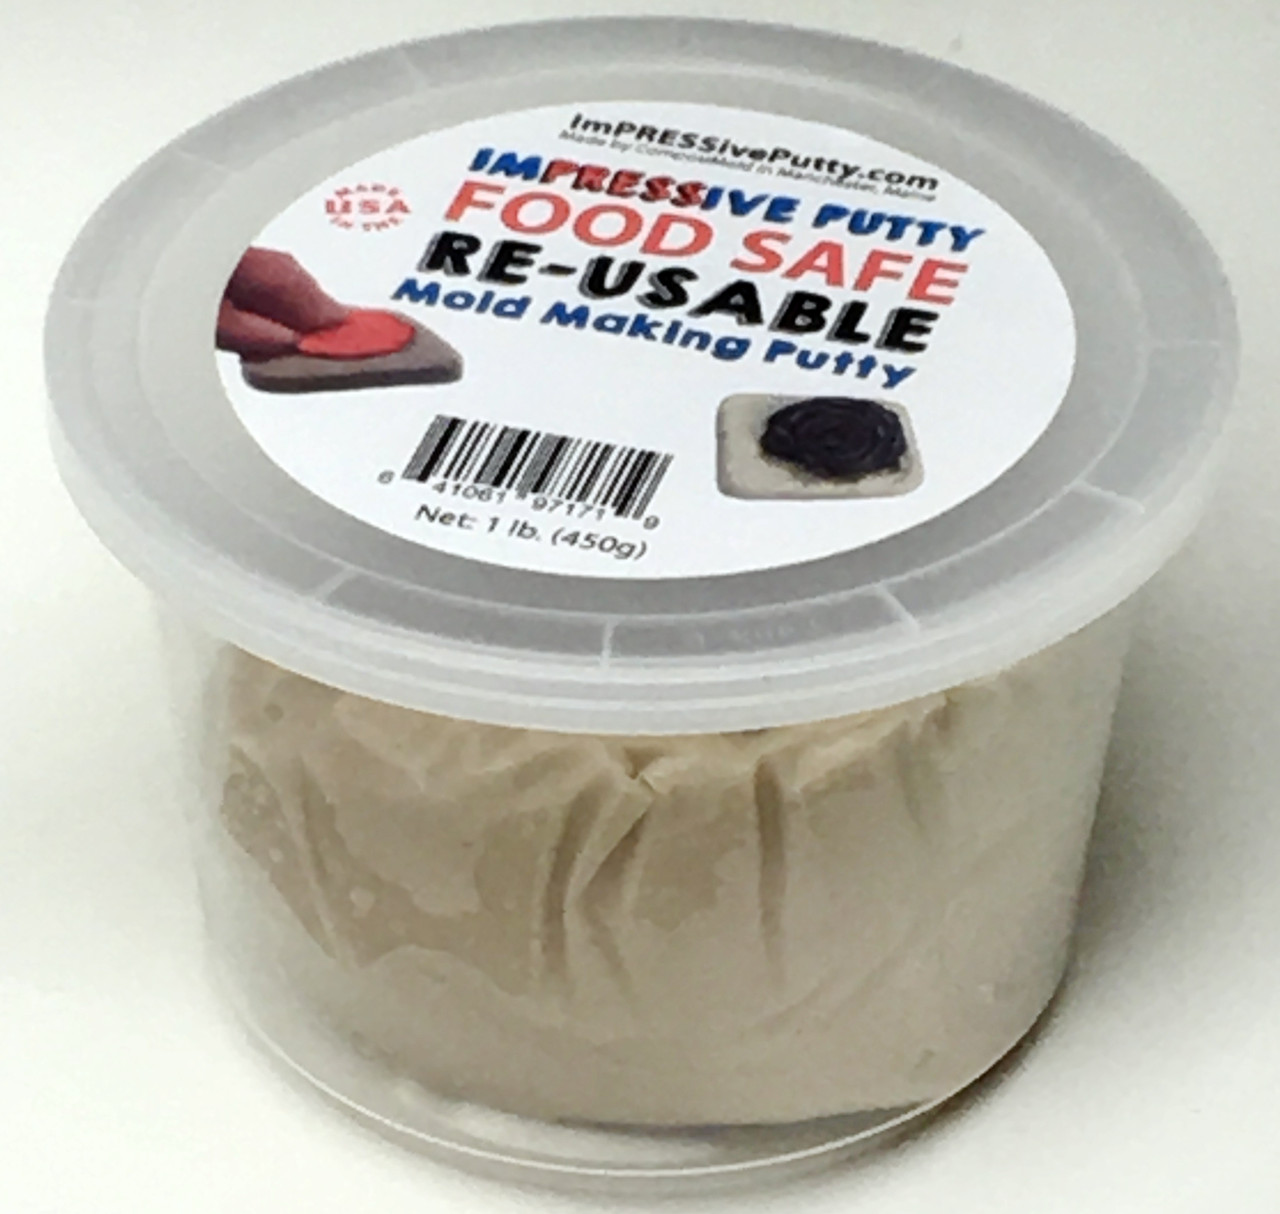 ImPRESSive Re-Usable Mold Making Putty 1 lb Molding Putty that can be remelted 